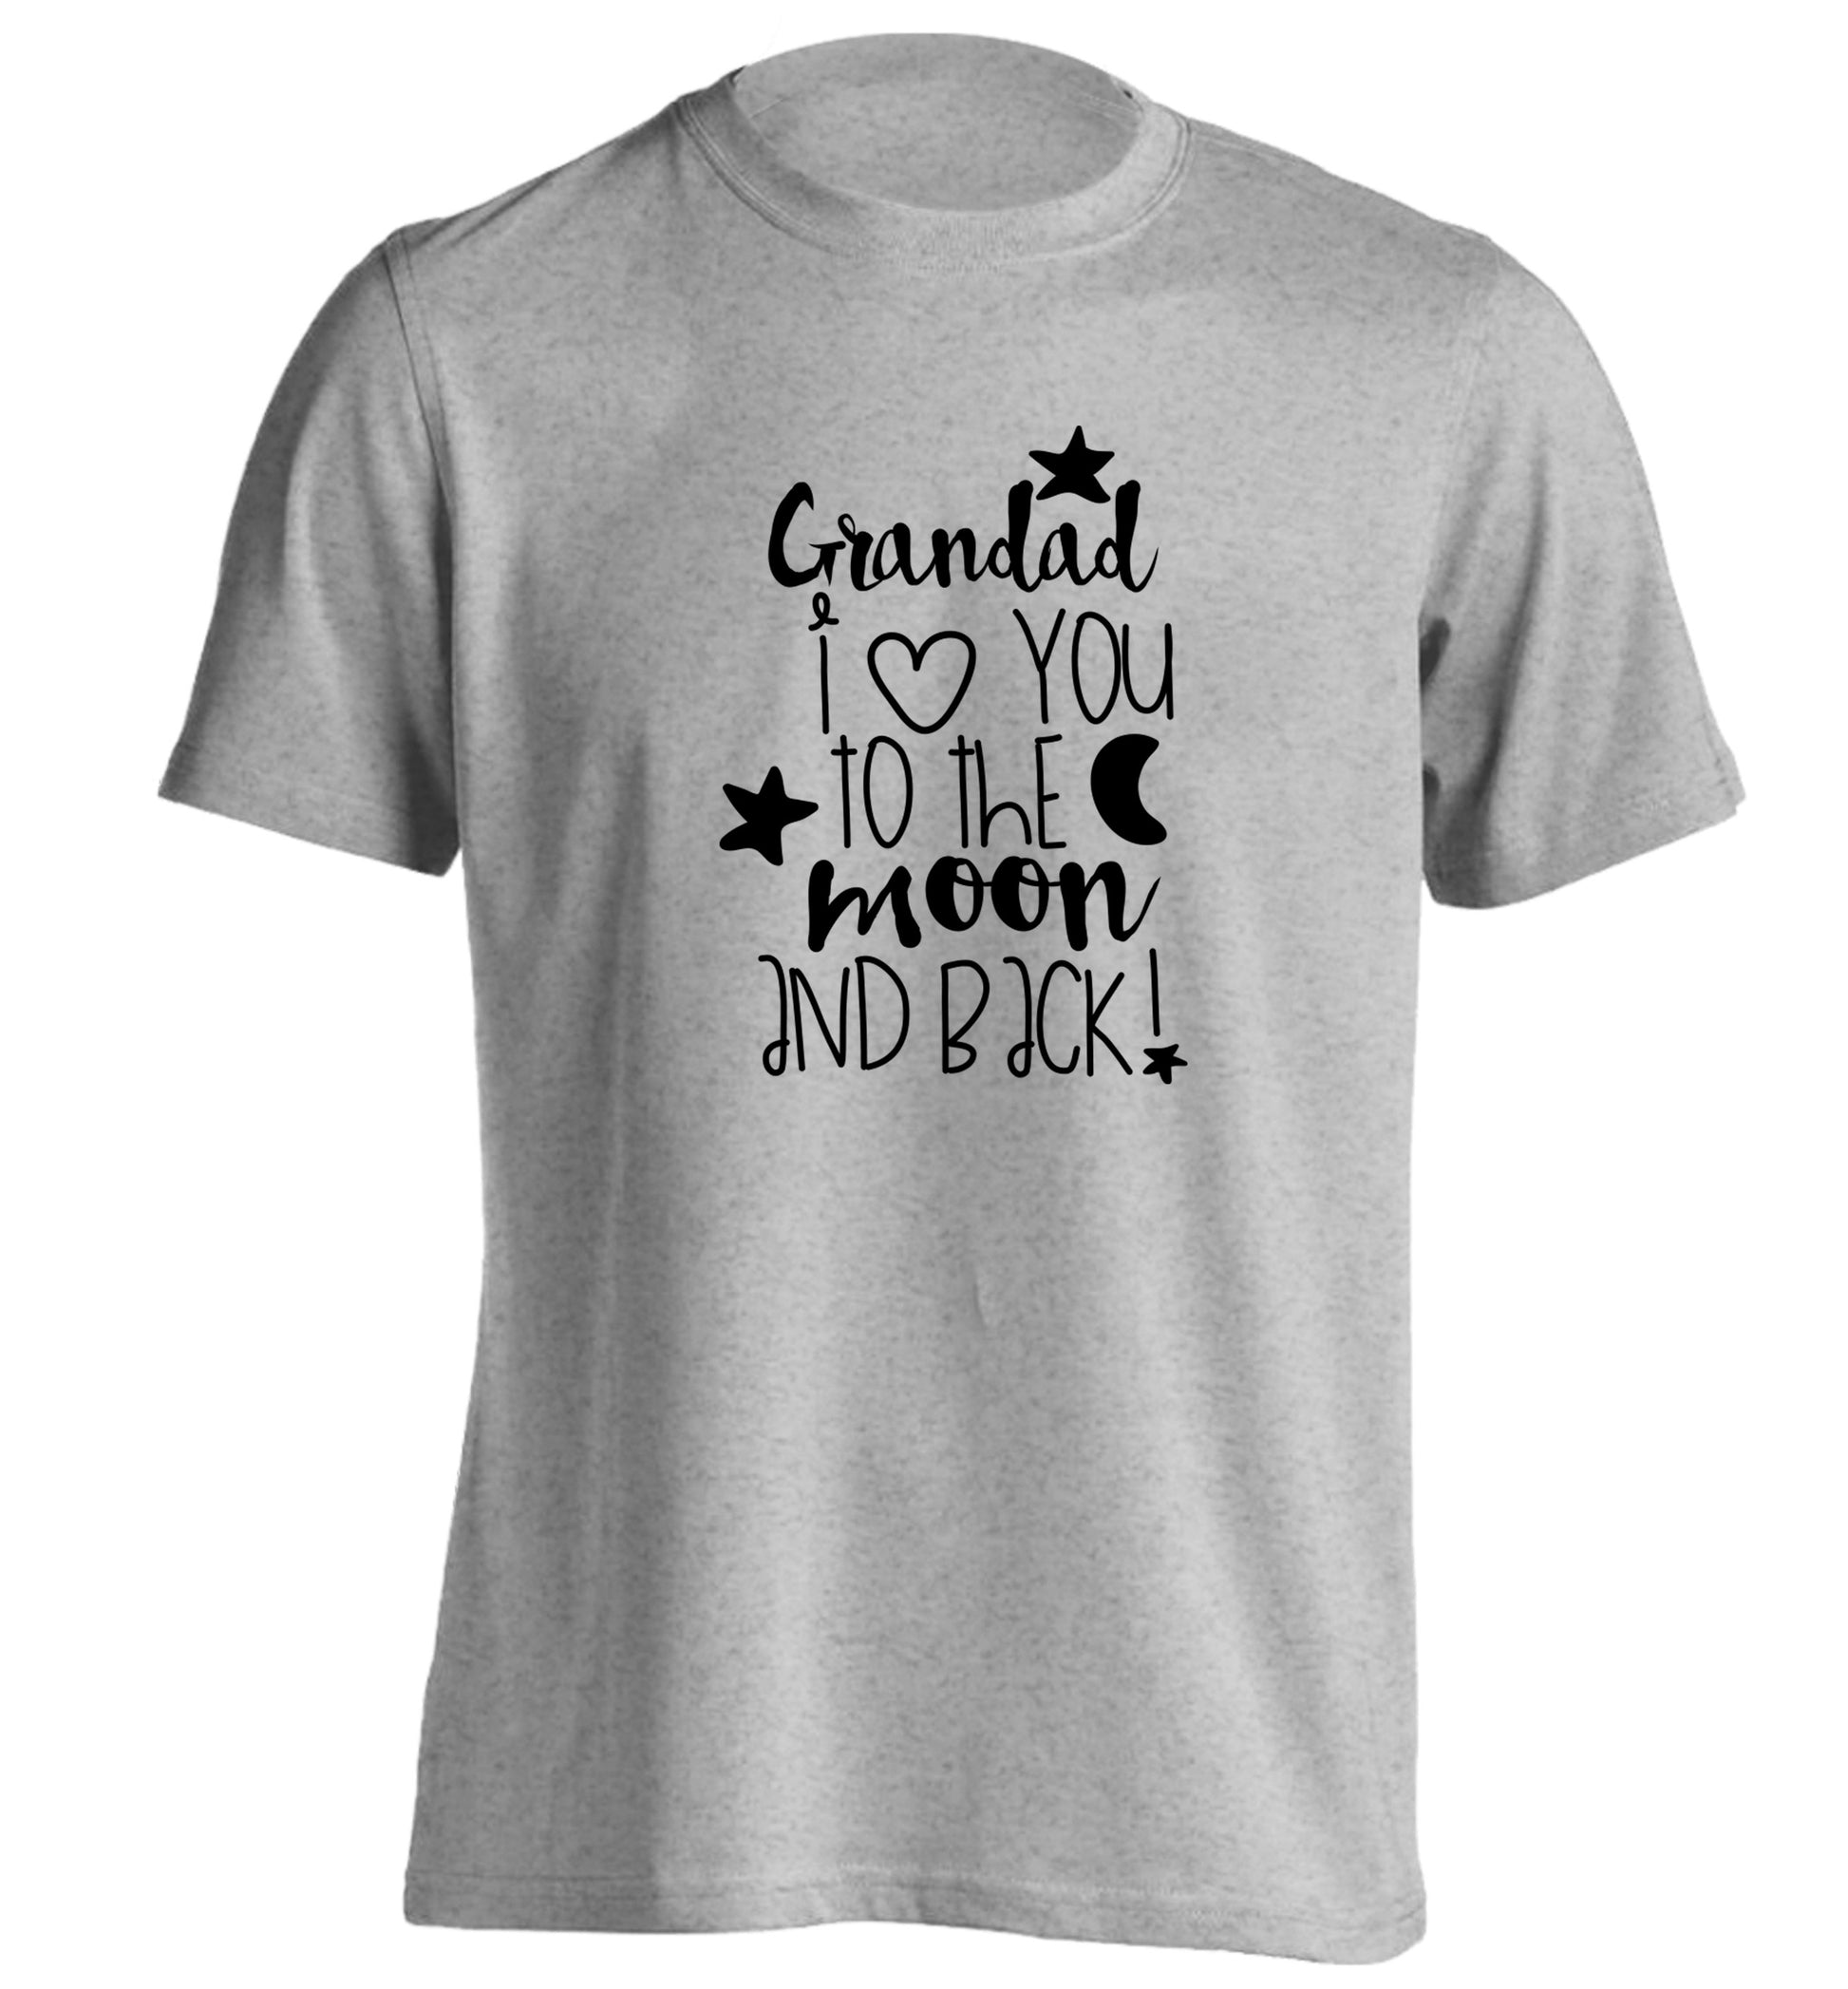 Grandad's I love you to the moon and back adults unisex grey Tshirt 2XL